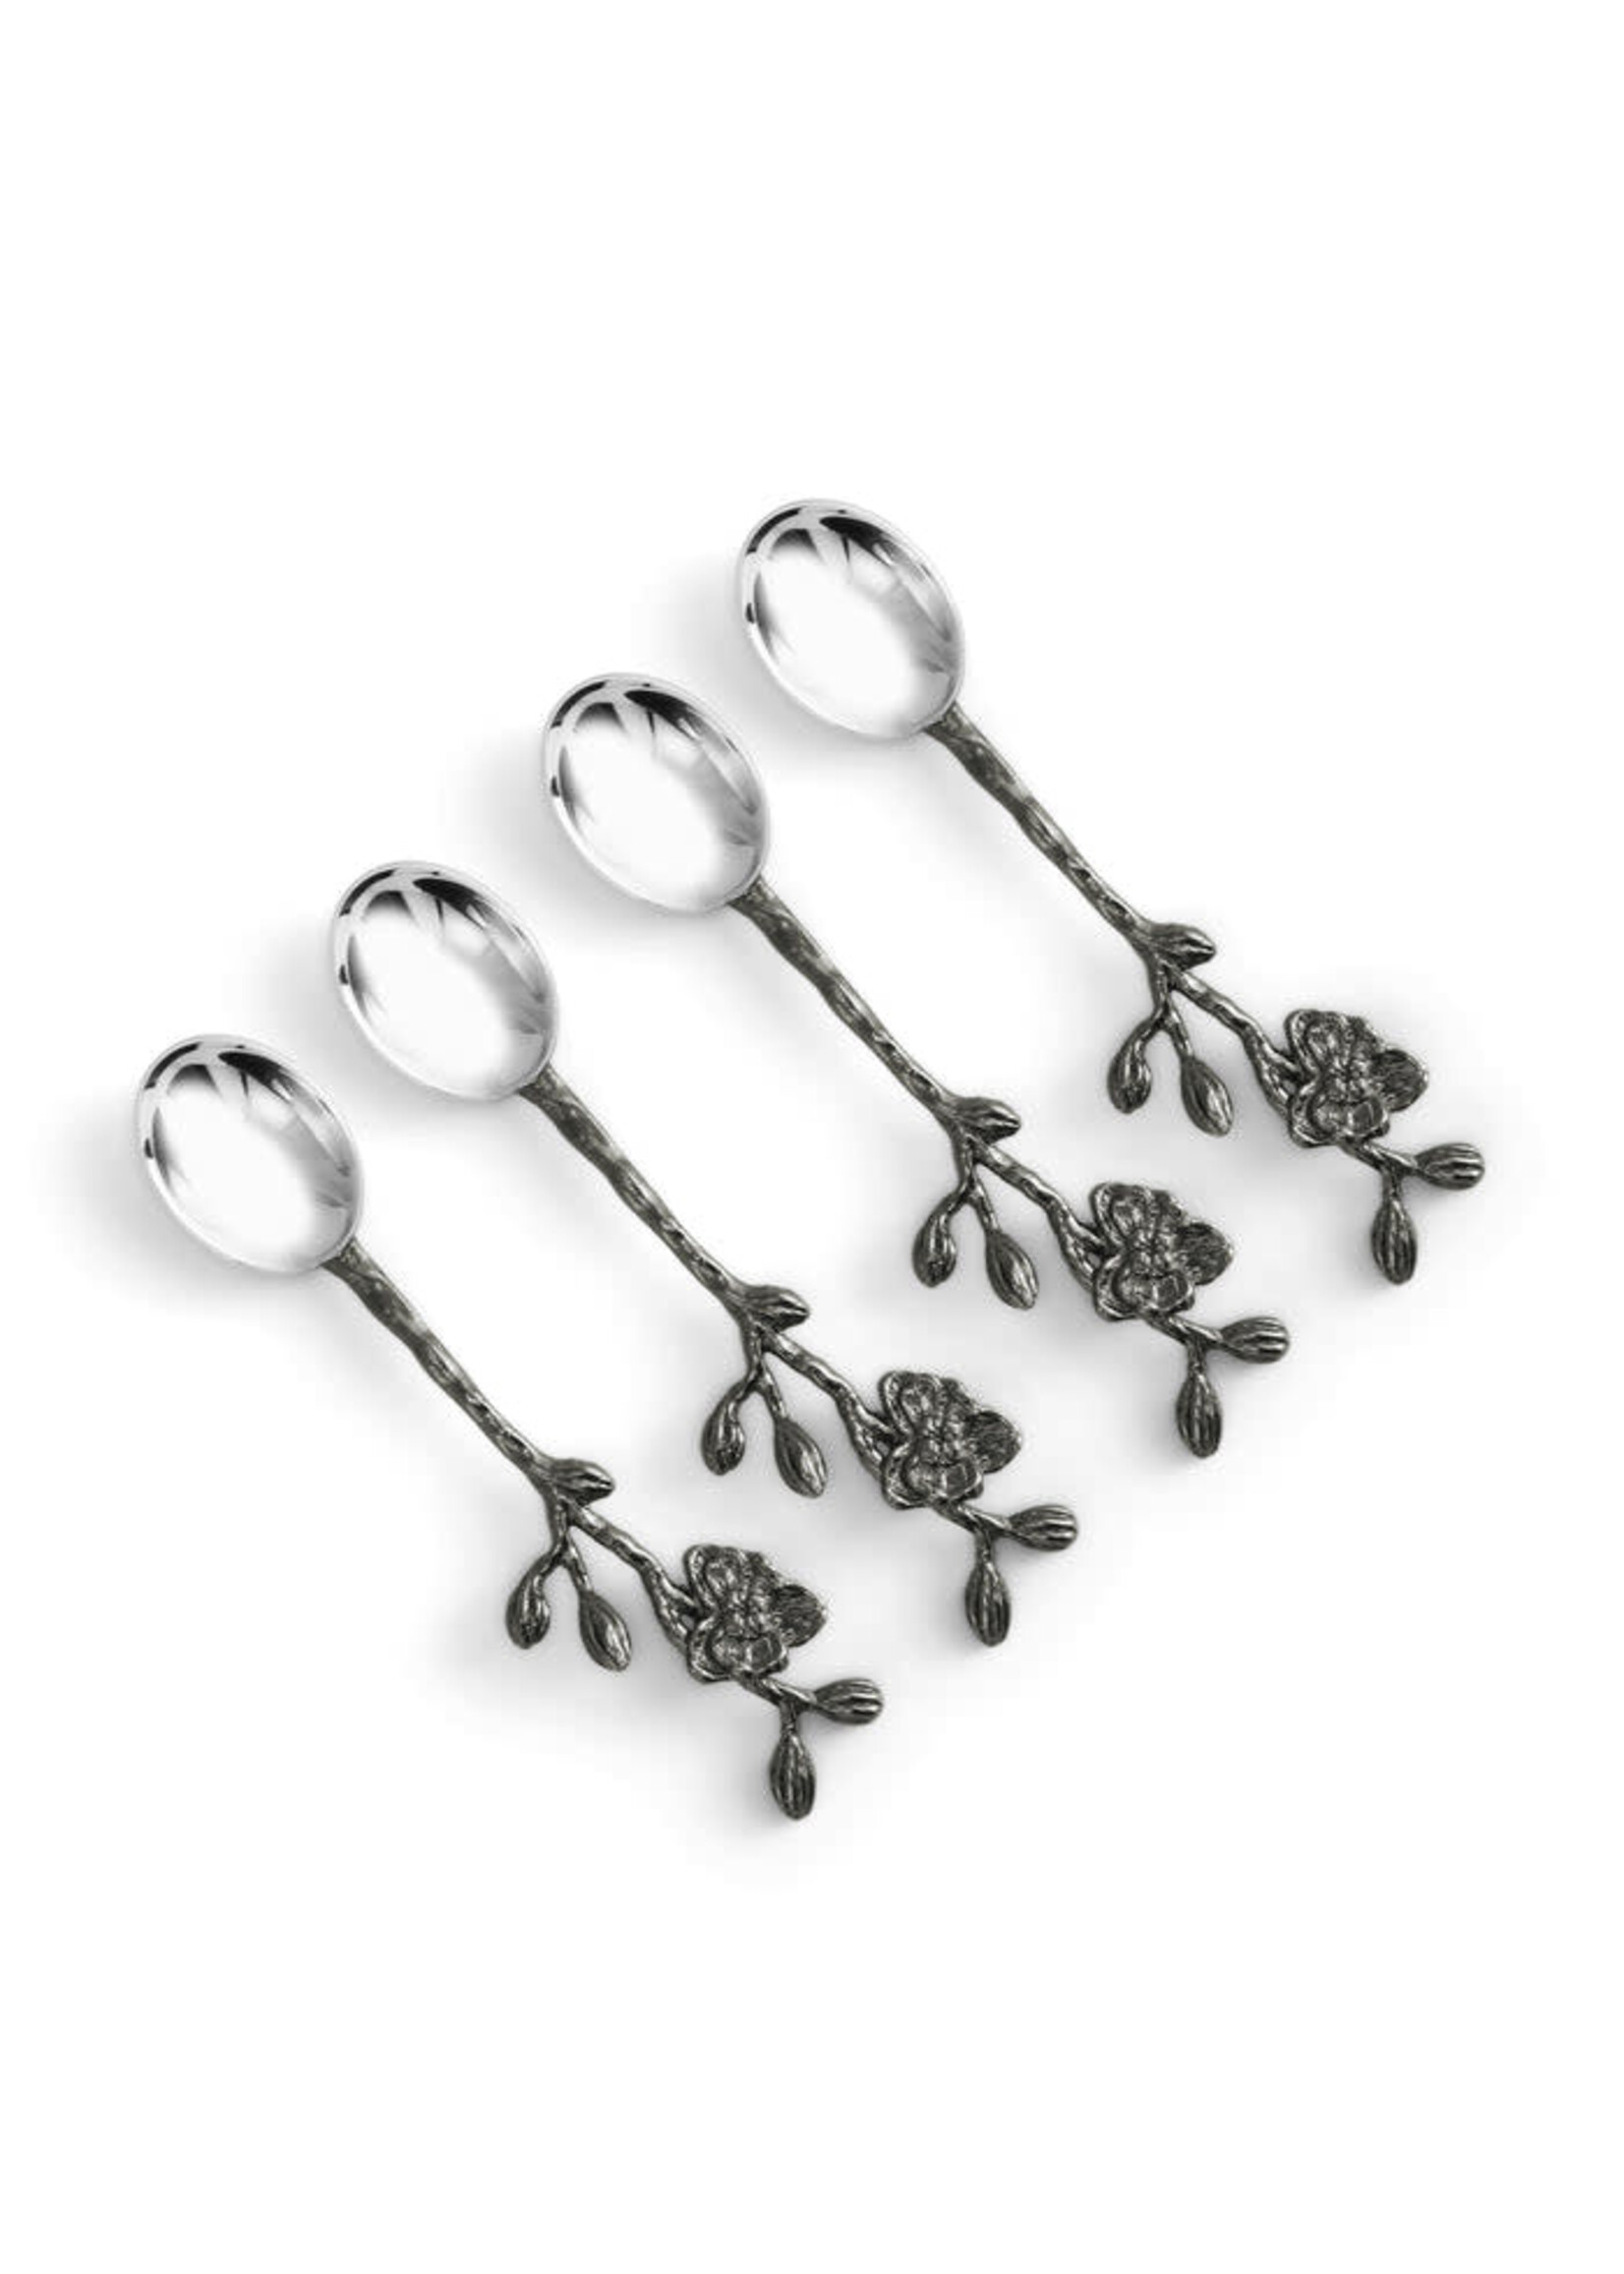 Michael Aram Black Orchid Hor D'oeuvres Spoon Set